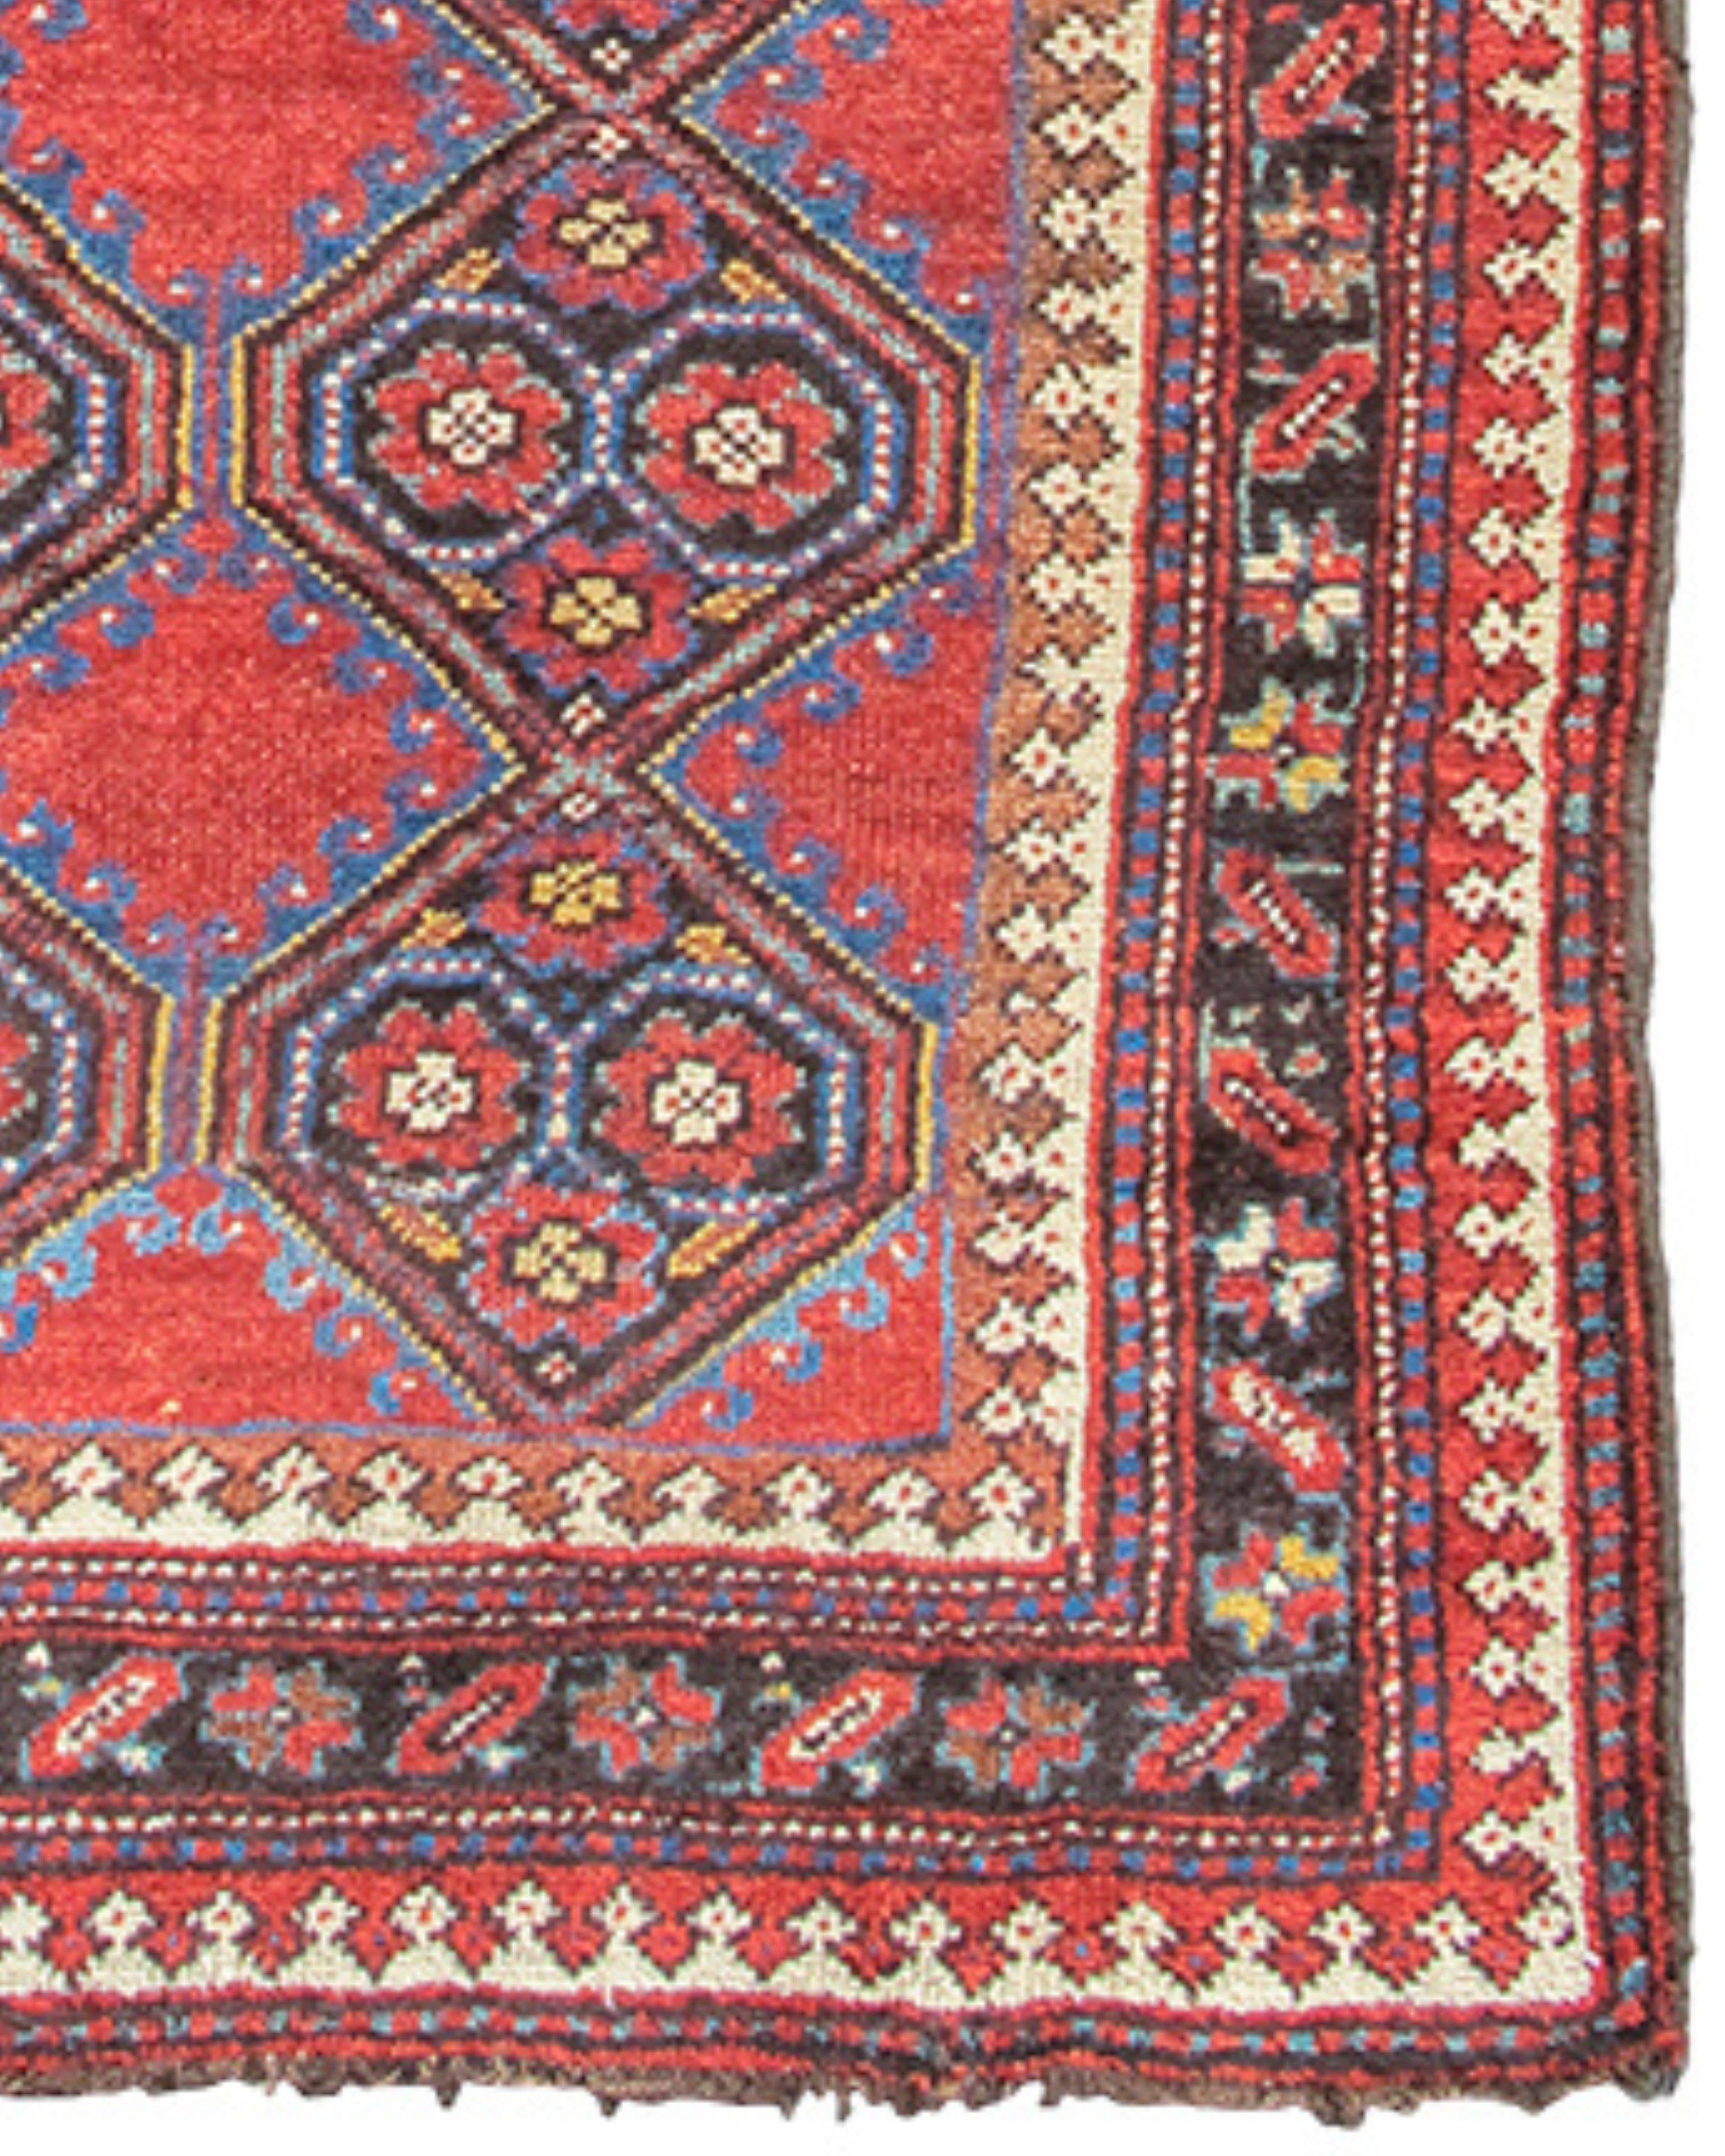 Antique Kurdish Rug, Late 19th Century In Excellent Condition For Sale In San Francisco, CA